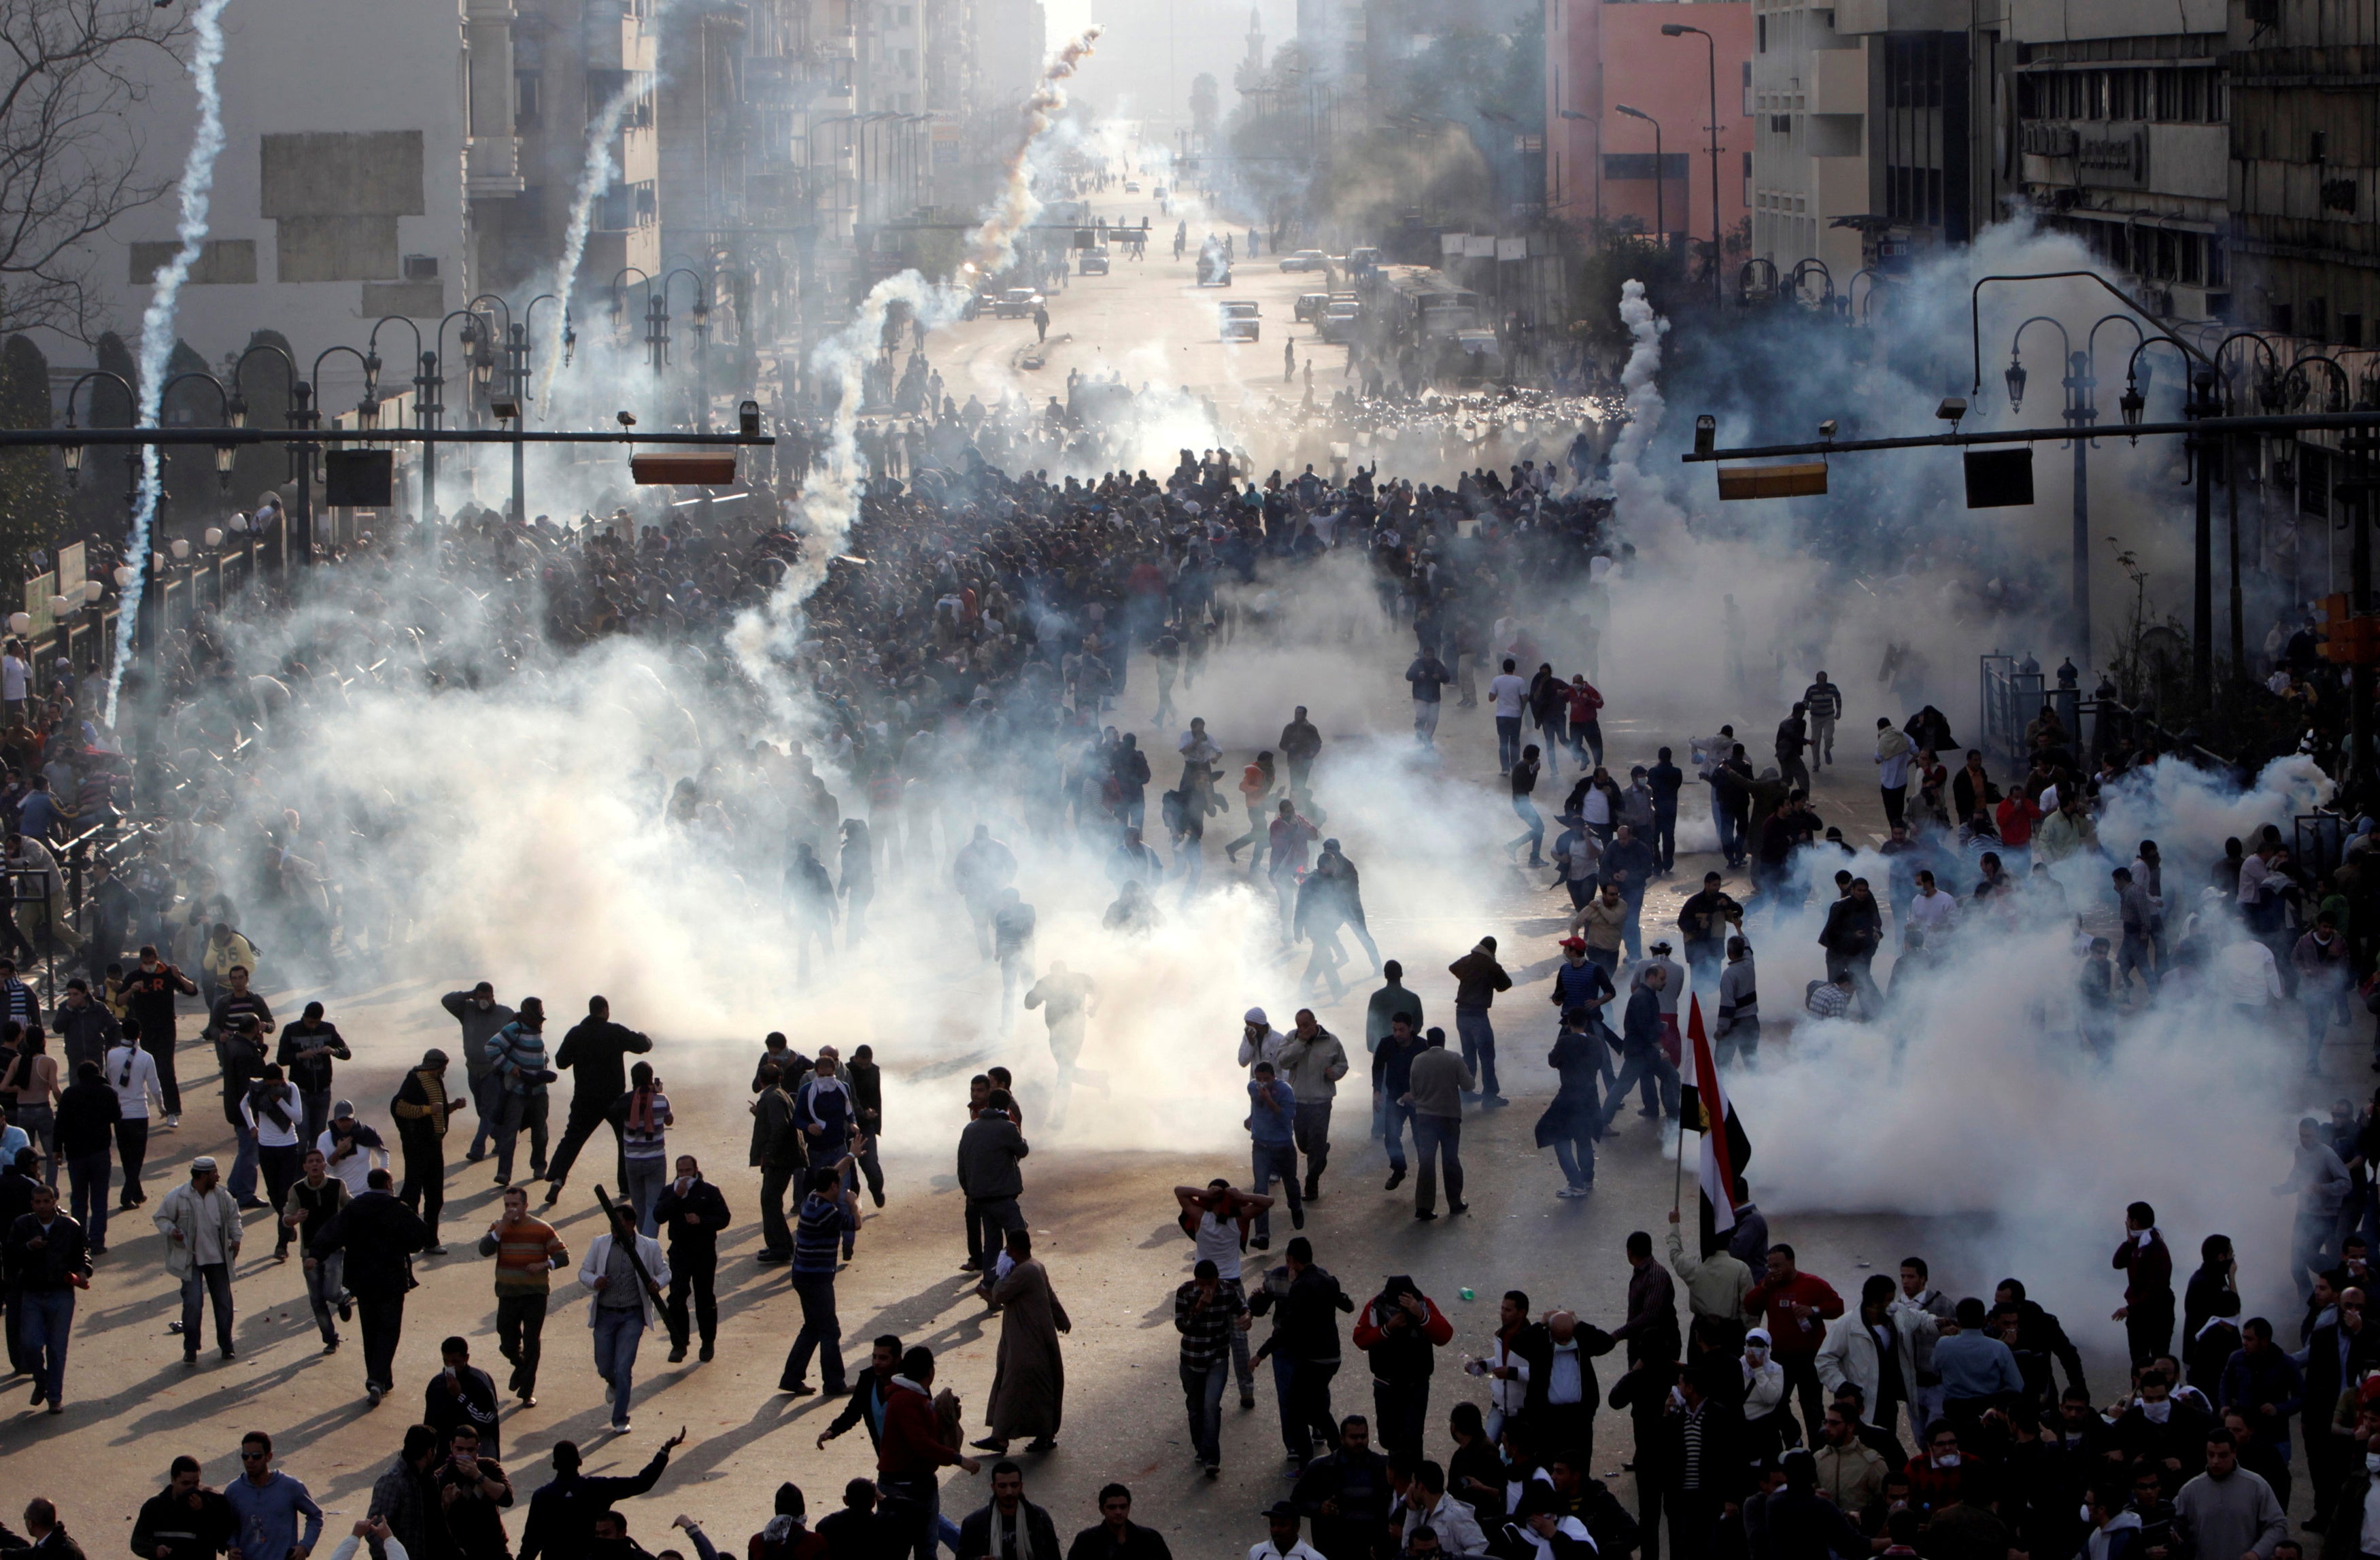 Protesters flee from tear gas fire during clashes in Cairo